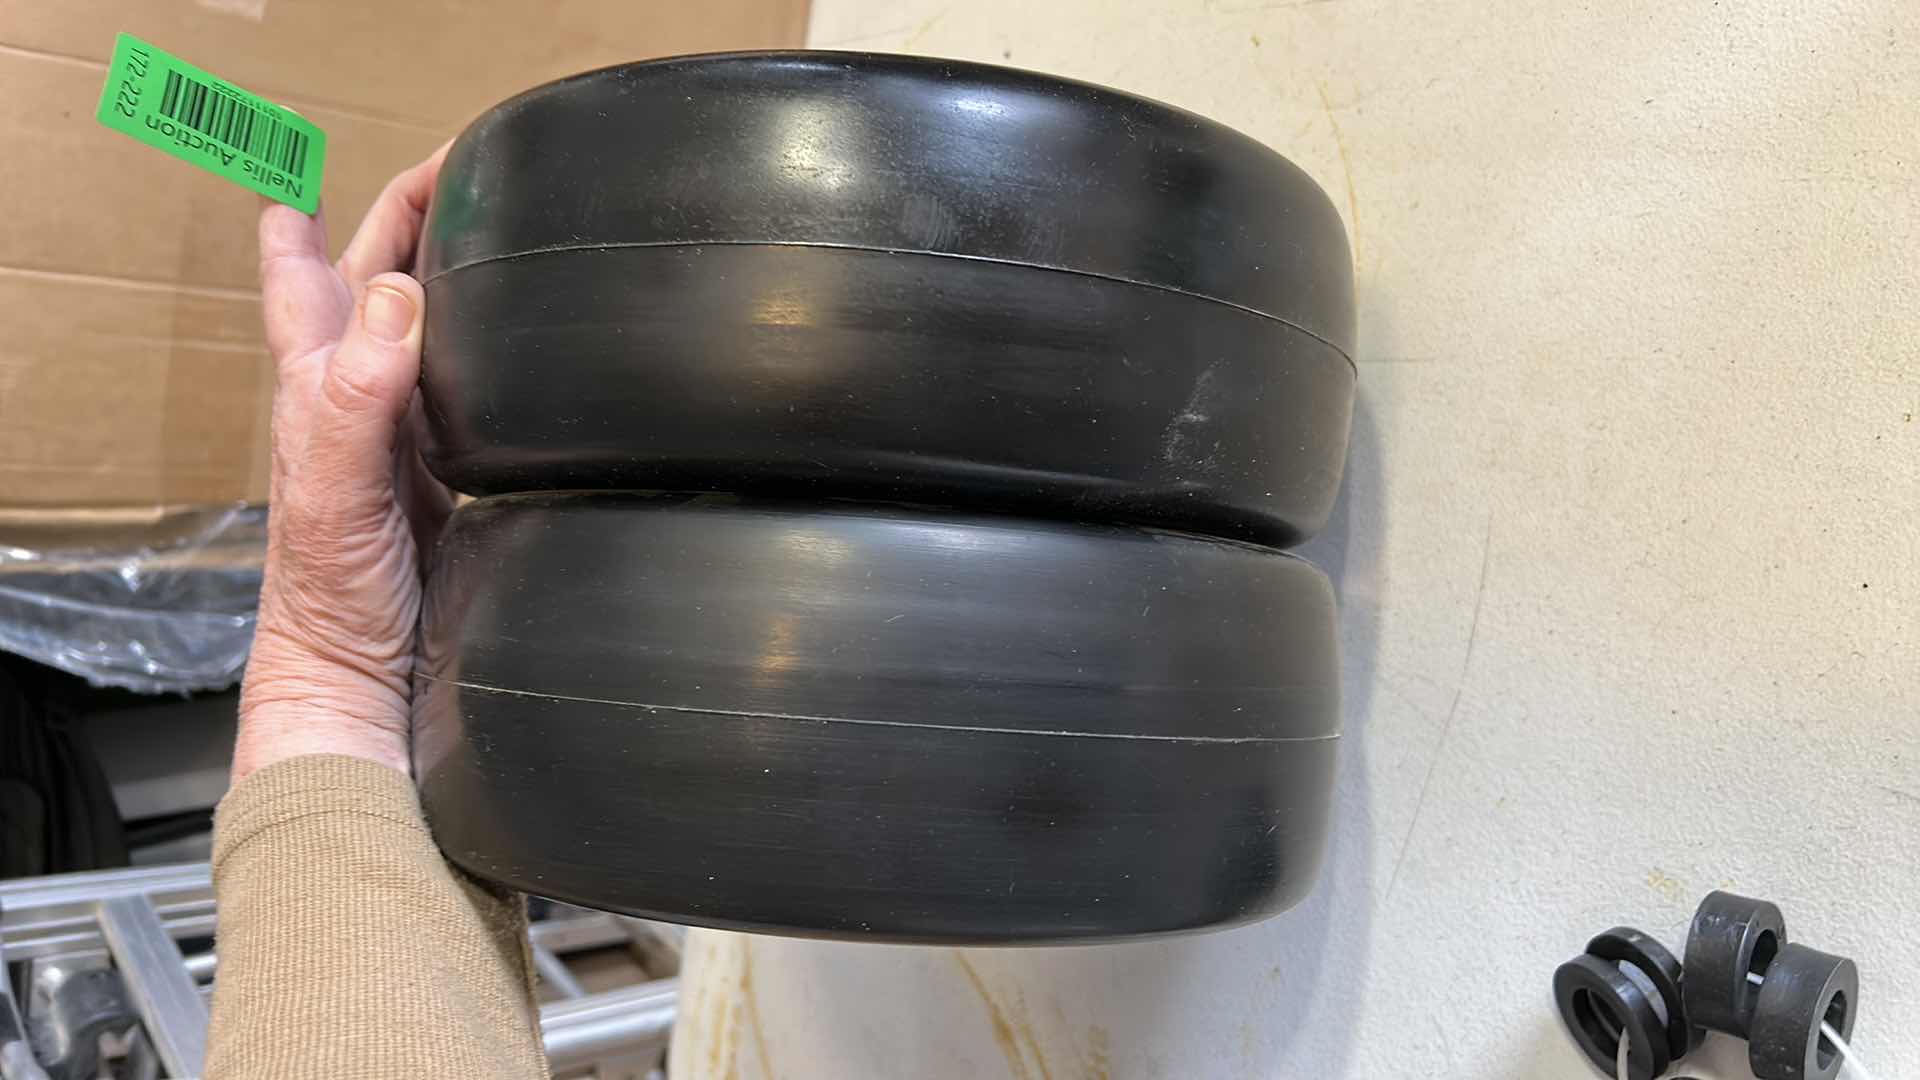 Photo 3 of PAIR OF FLAT FREE LAWN MOWER TIRES 11 X 4.00-5" 